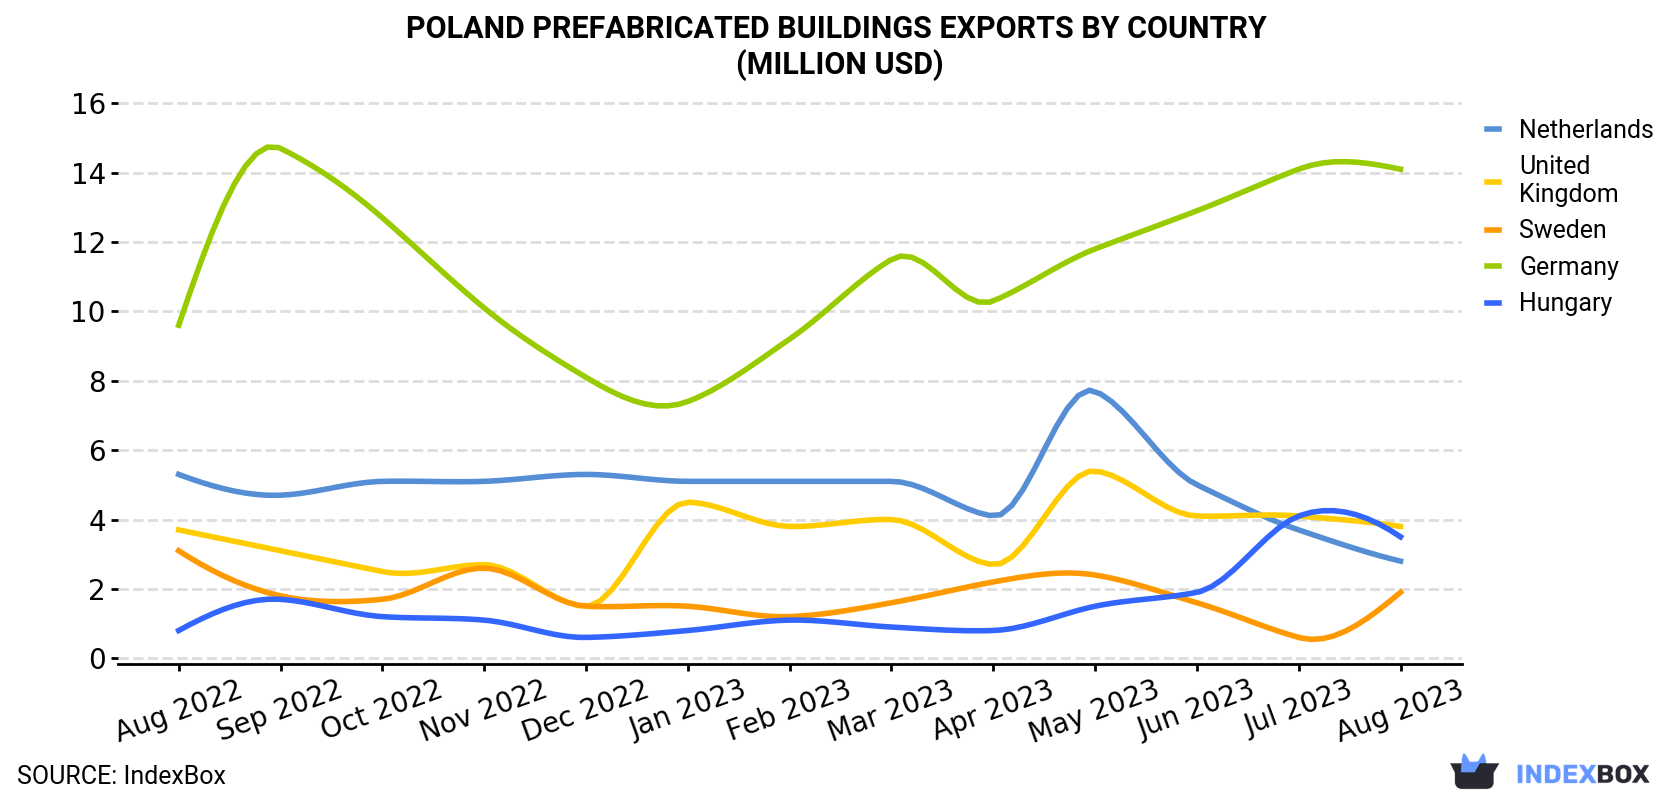 Poland Prefabricated Buildings Exports By Country (Million USD)